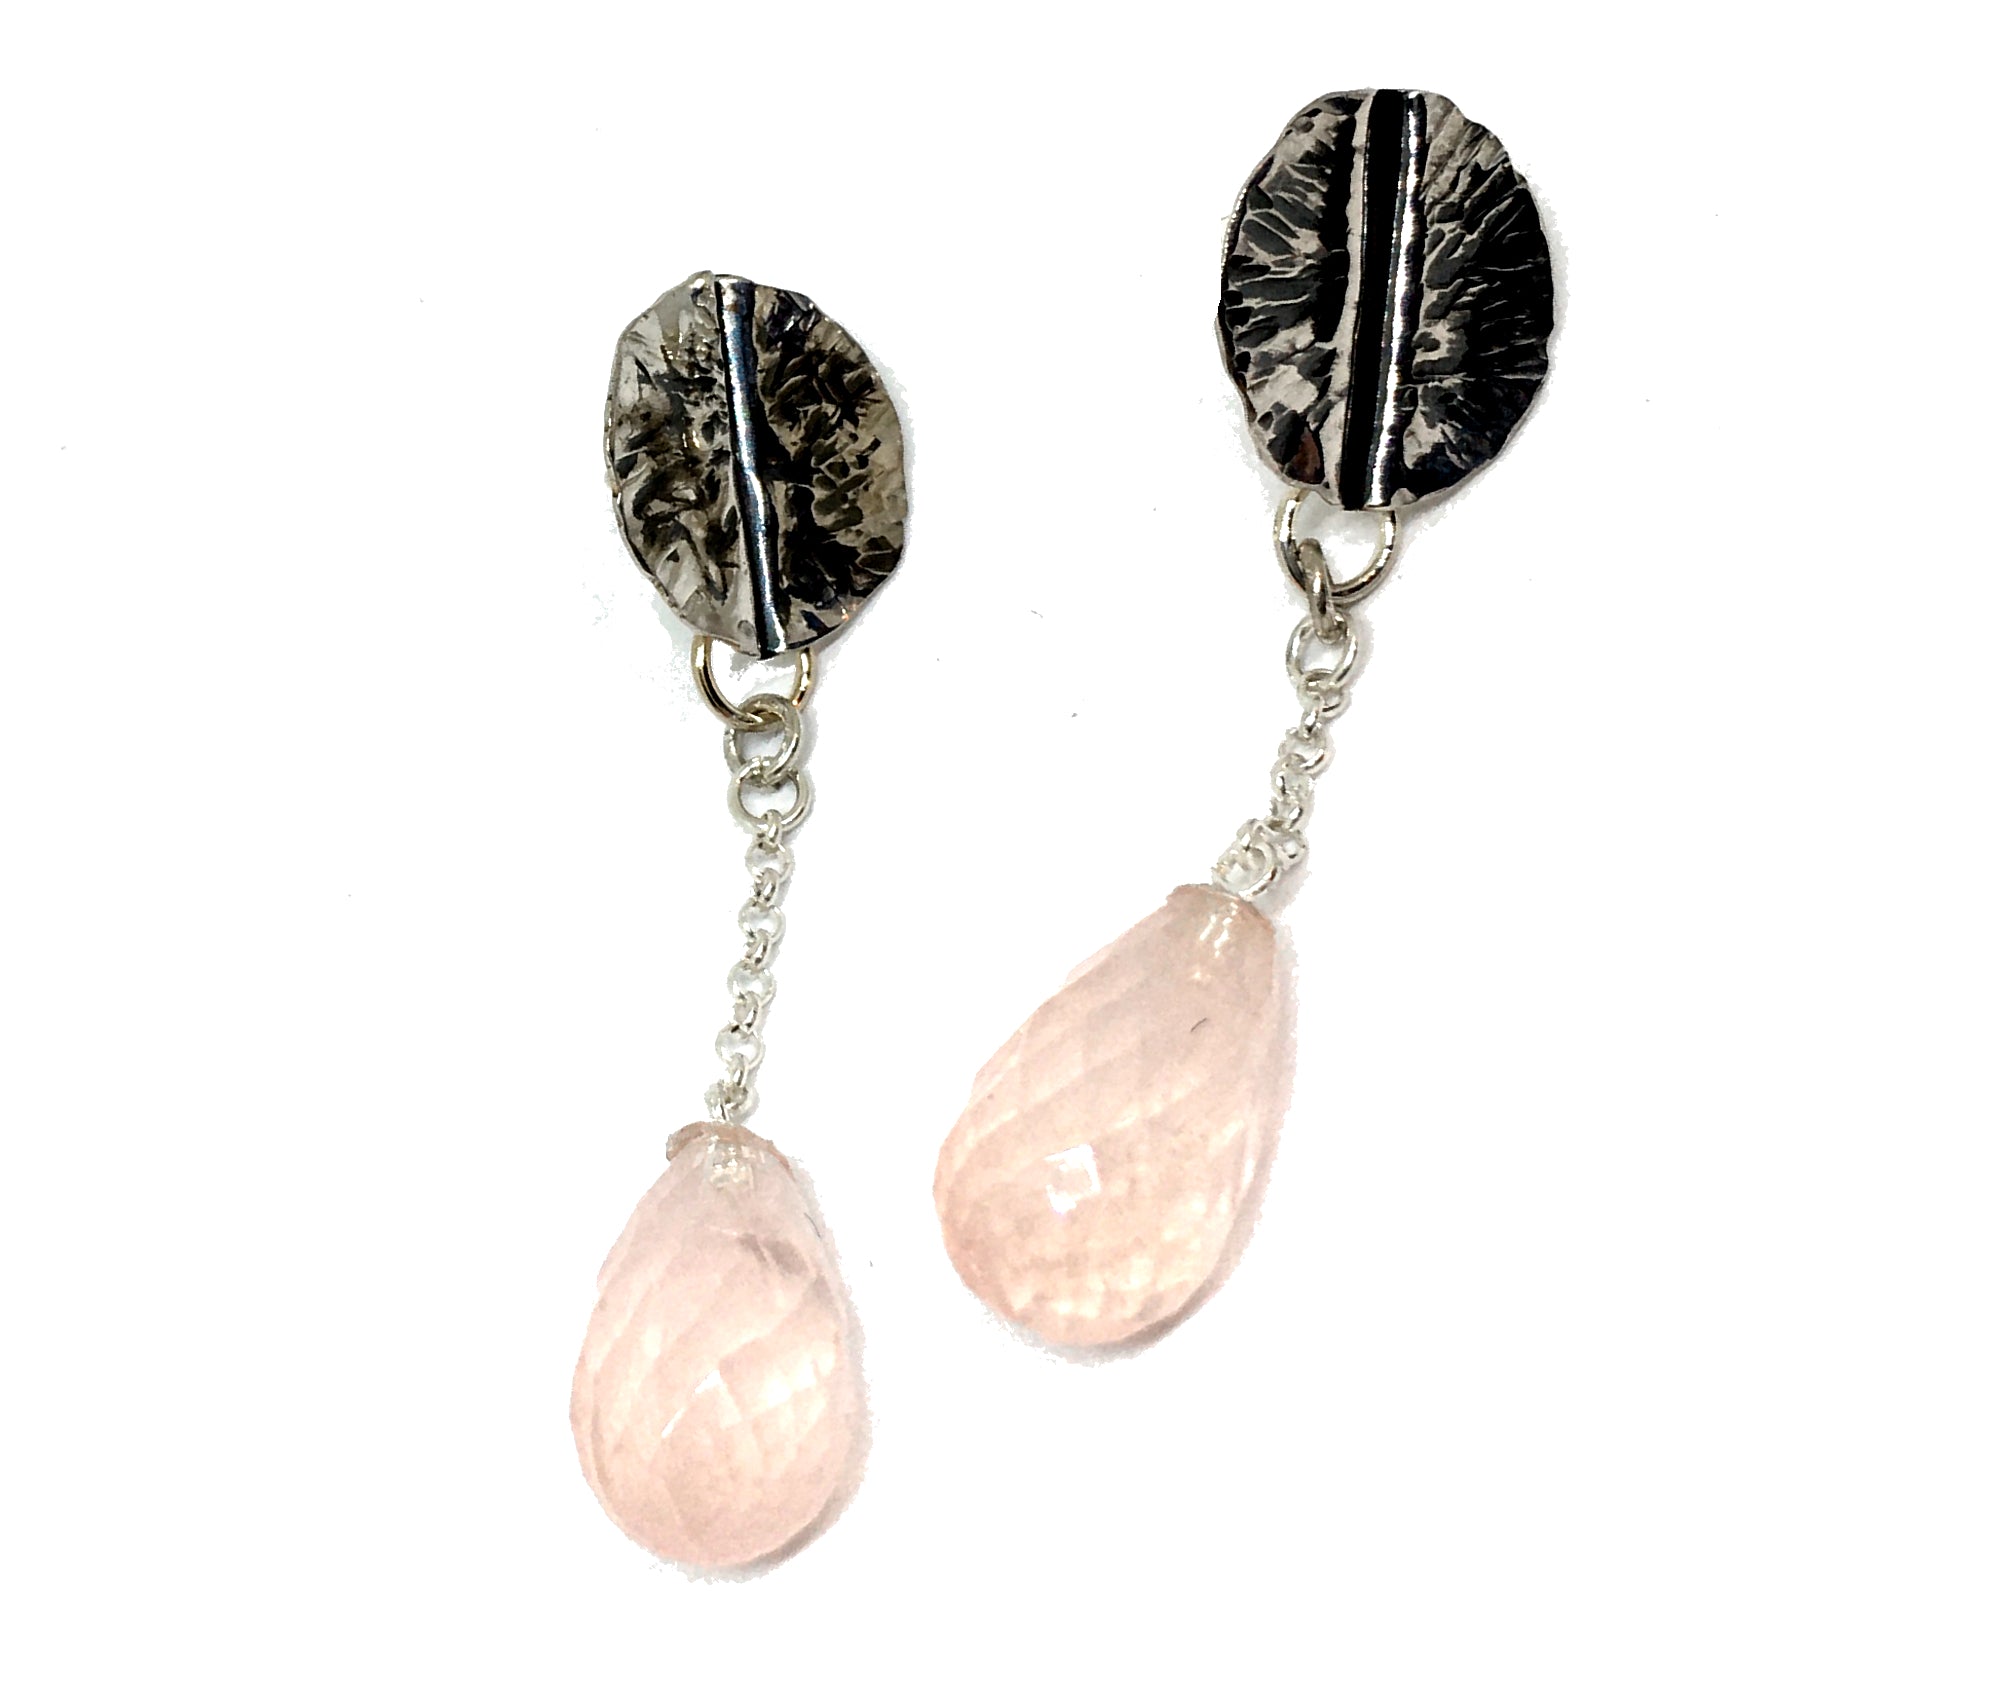 Hand Forged Leaf Earrings with Rose Quartz Drops